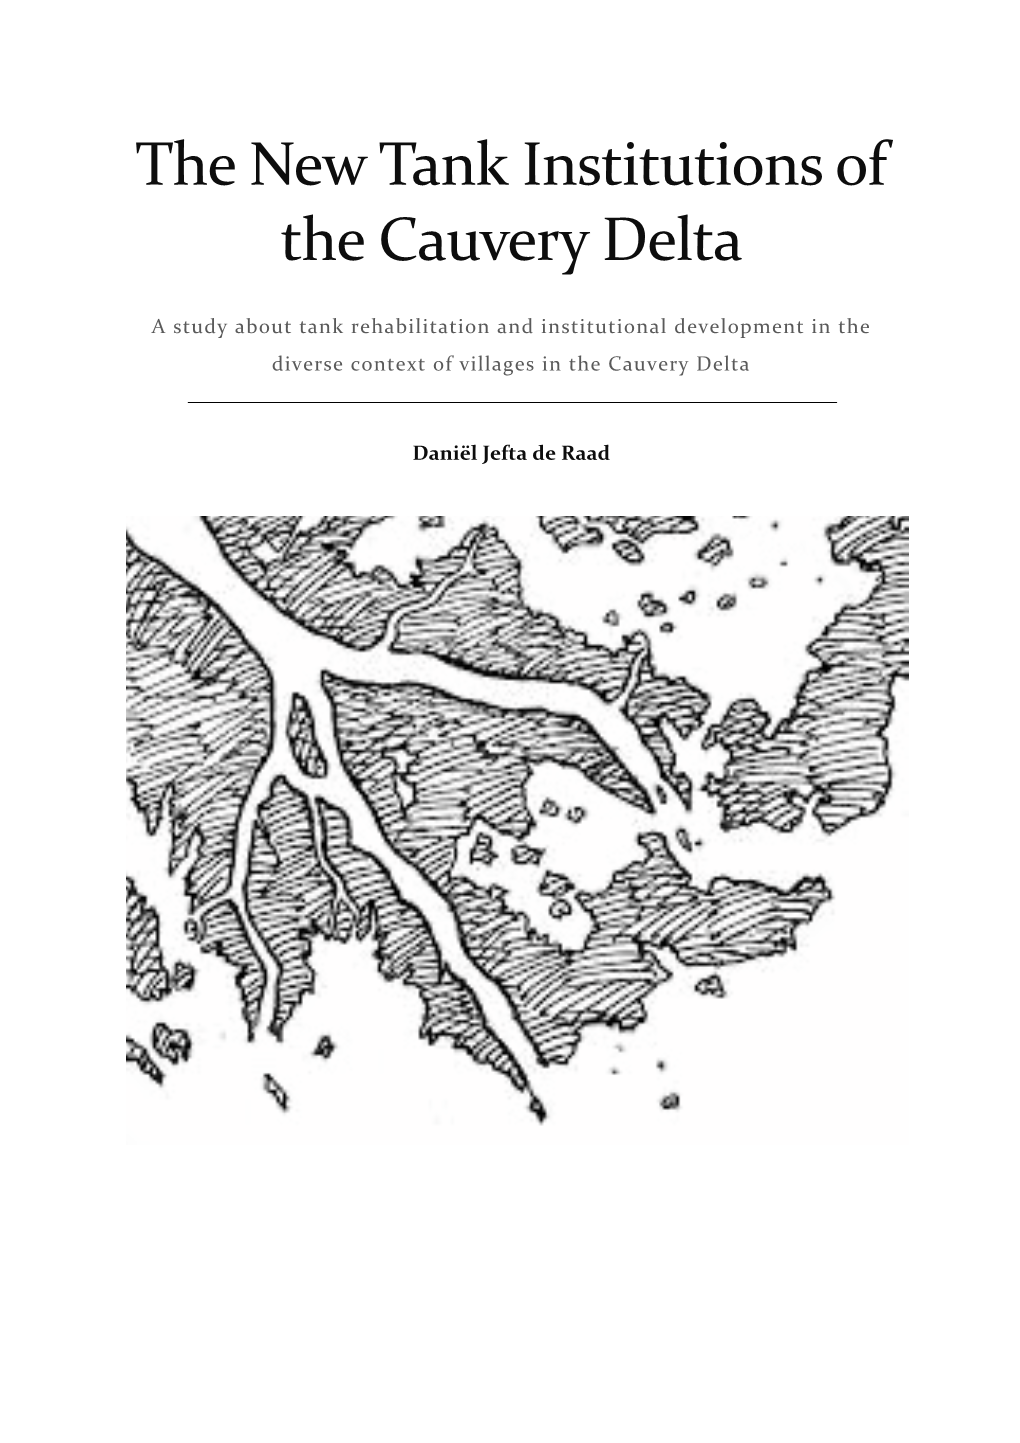 The New Tank Institutions of the Cauvery Delta